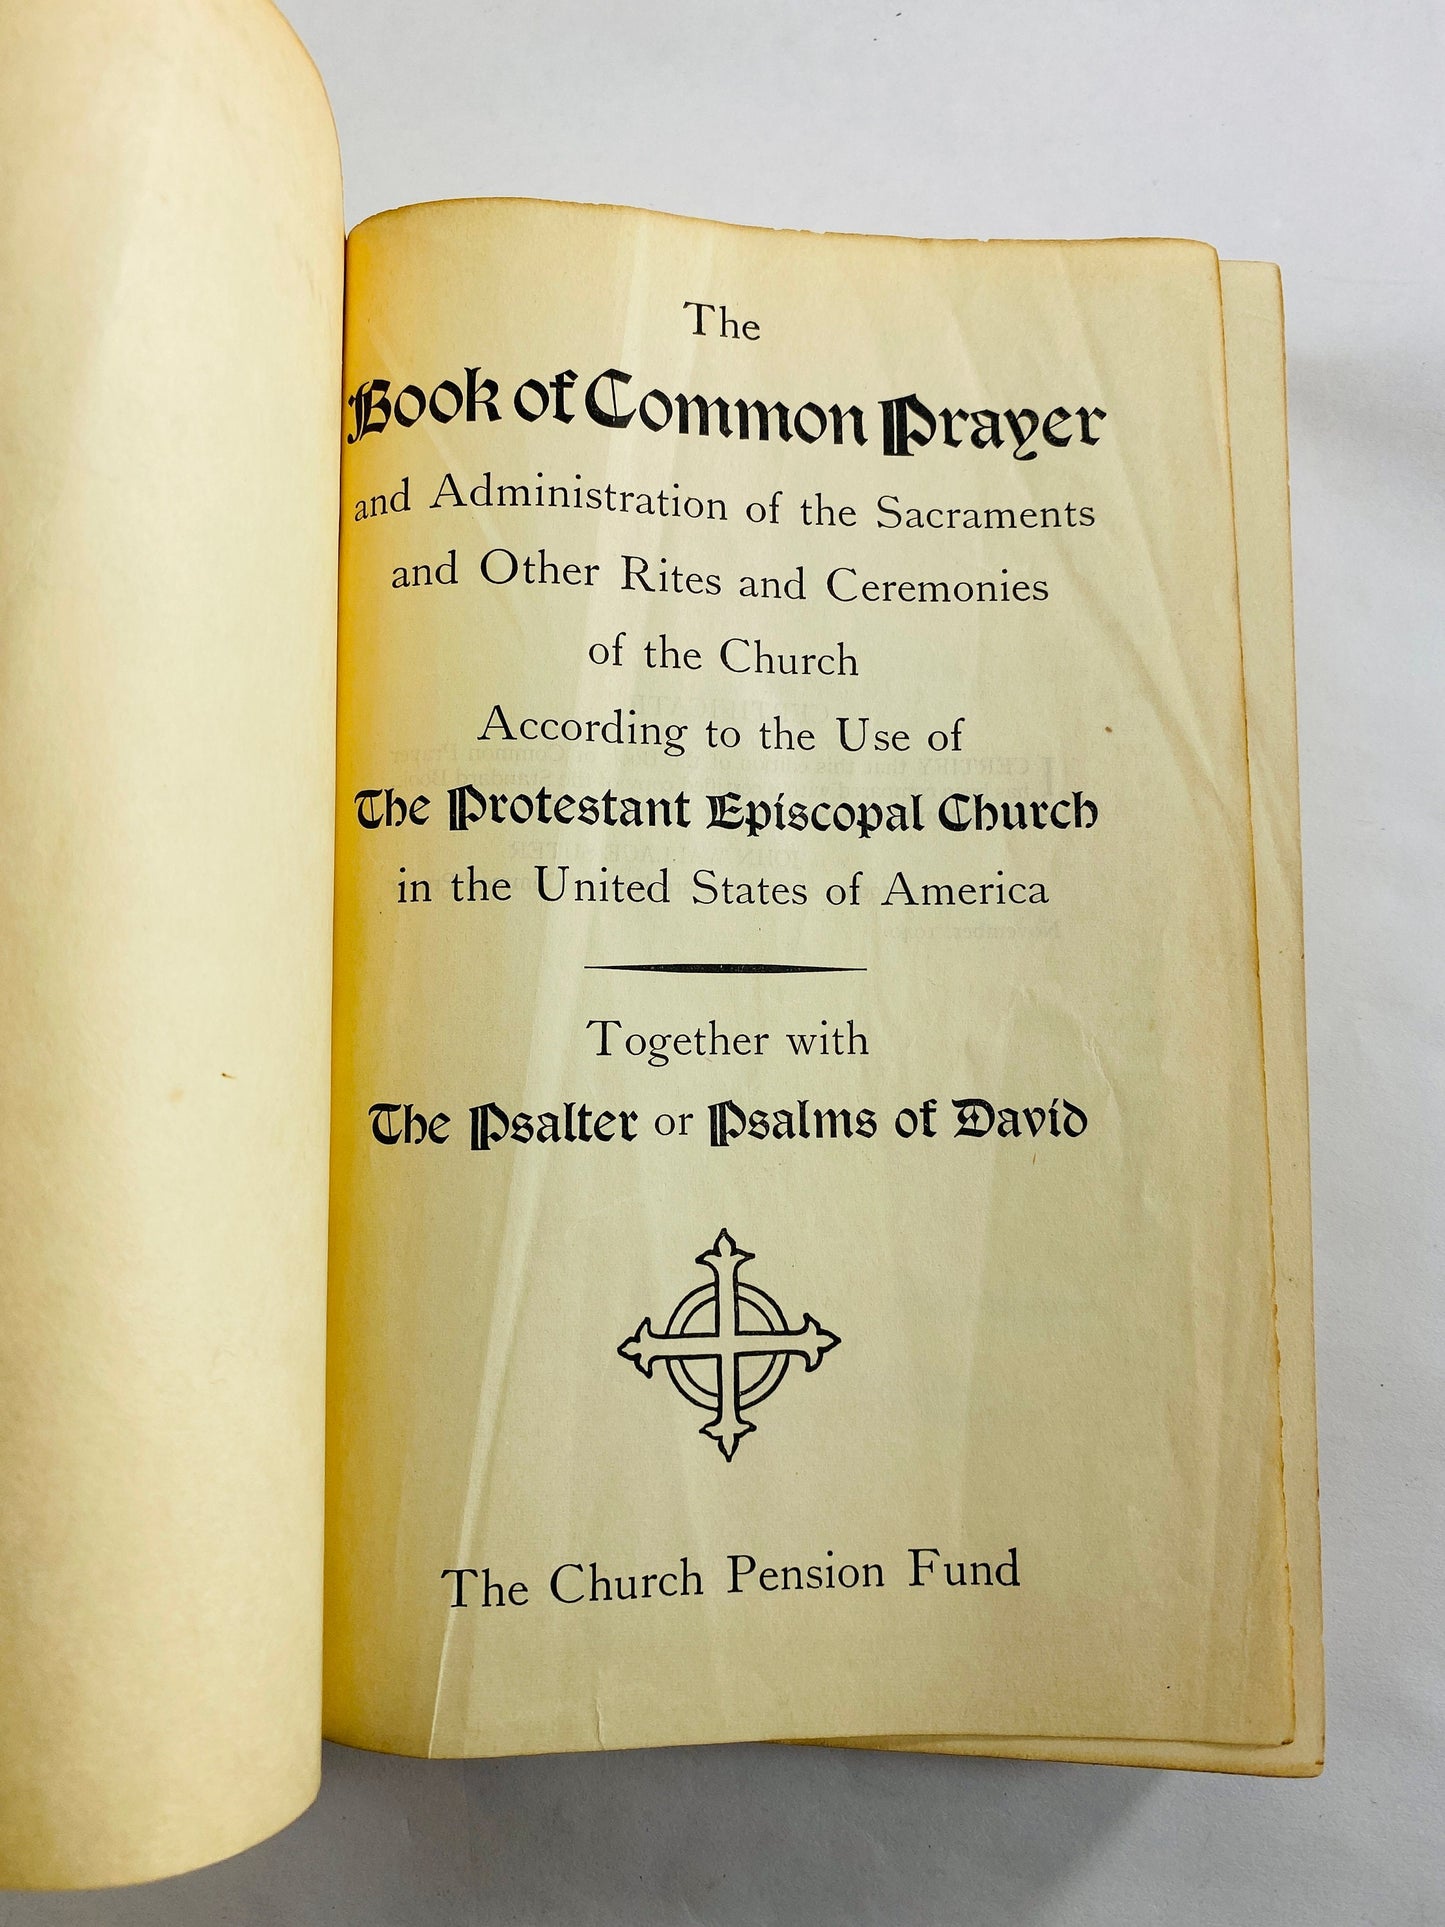 1940 Vintage Book of Common Prayer liturgical prayer book. Beautiful Episcopal Chruch decor with Psalter of Psalms of David